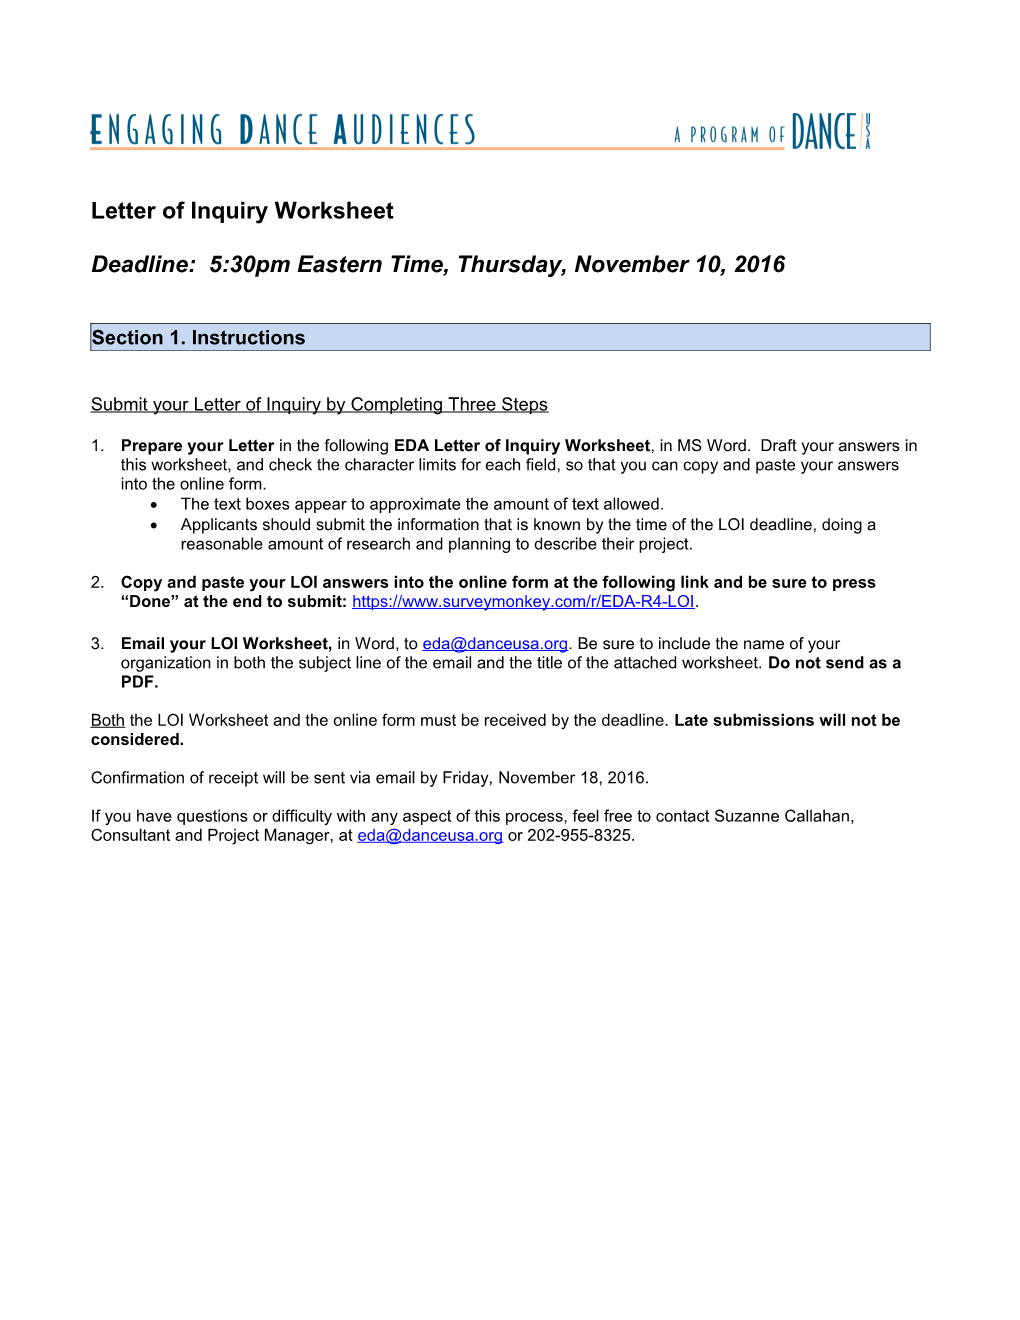 Letter of Inquiry Worksheet